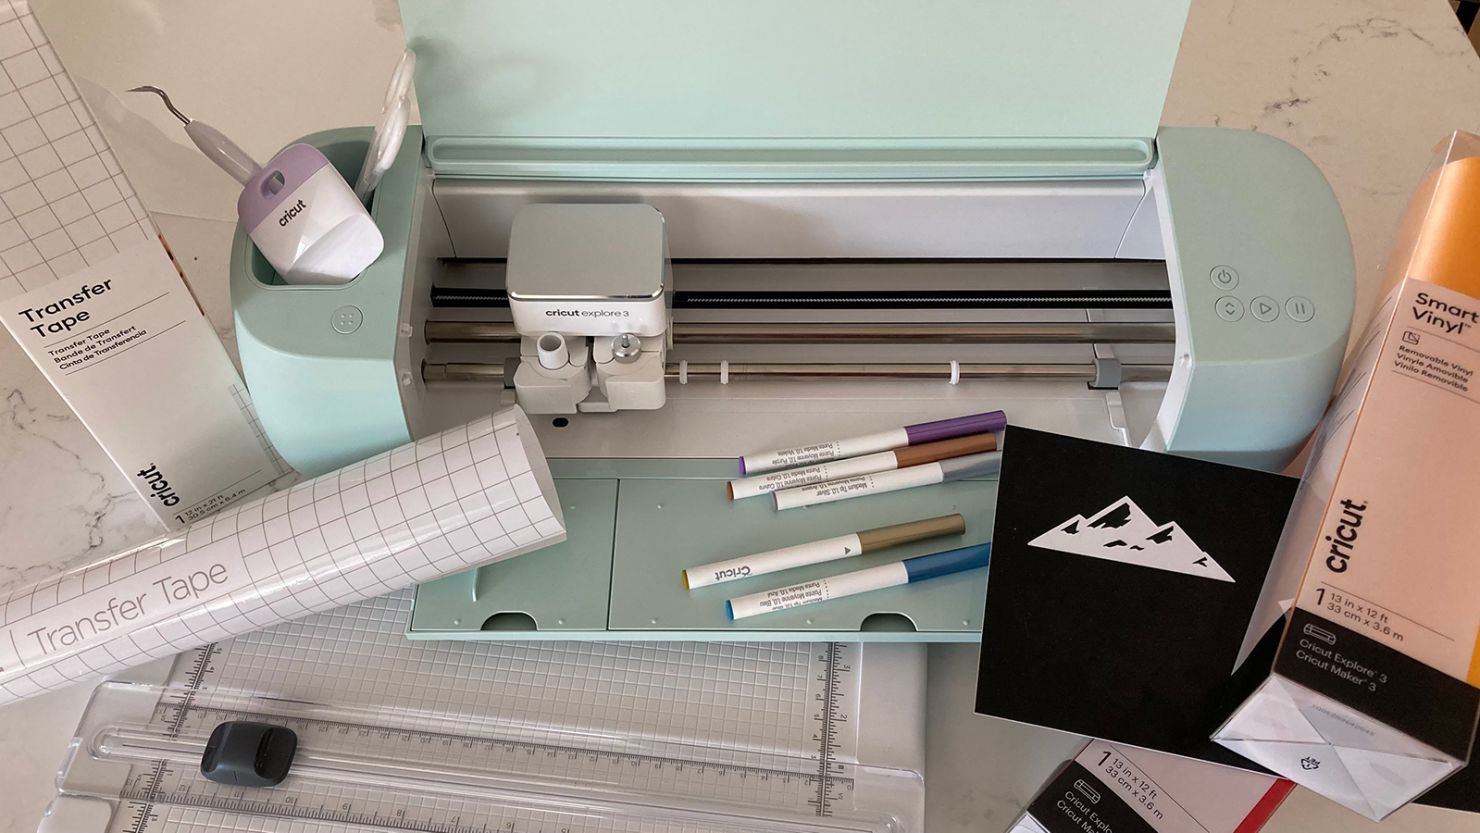 Cricut Maker 3: Here's everything you need to know